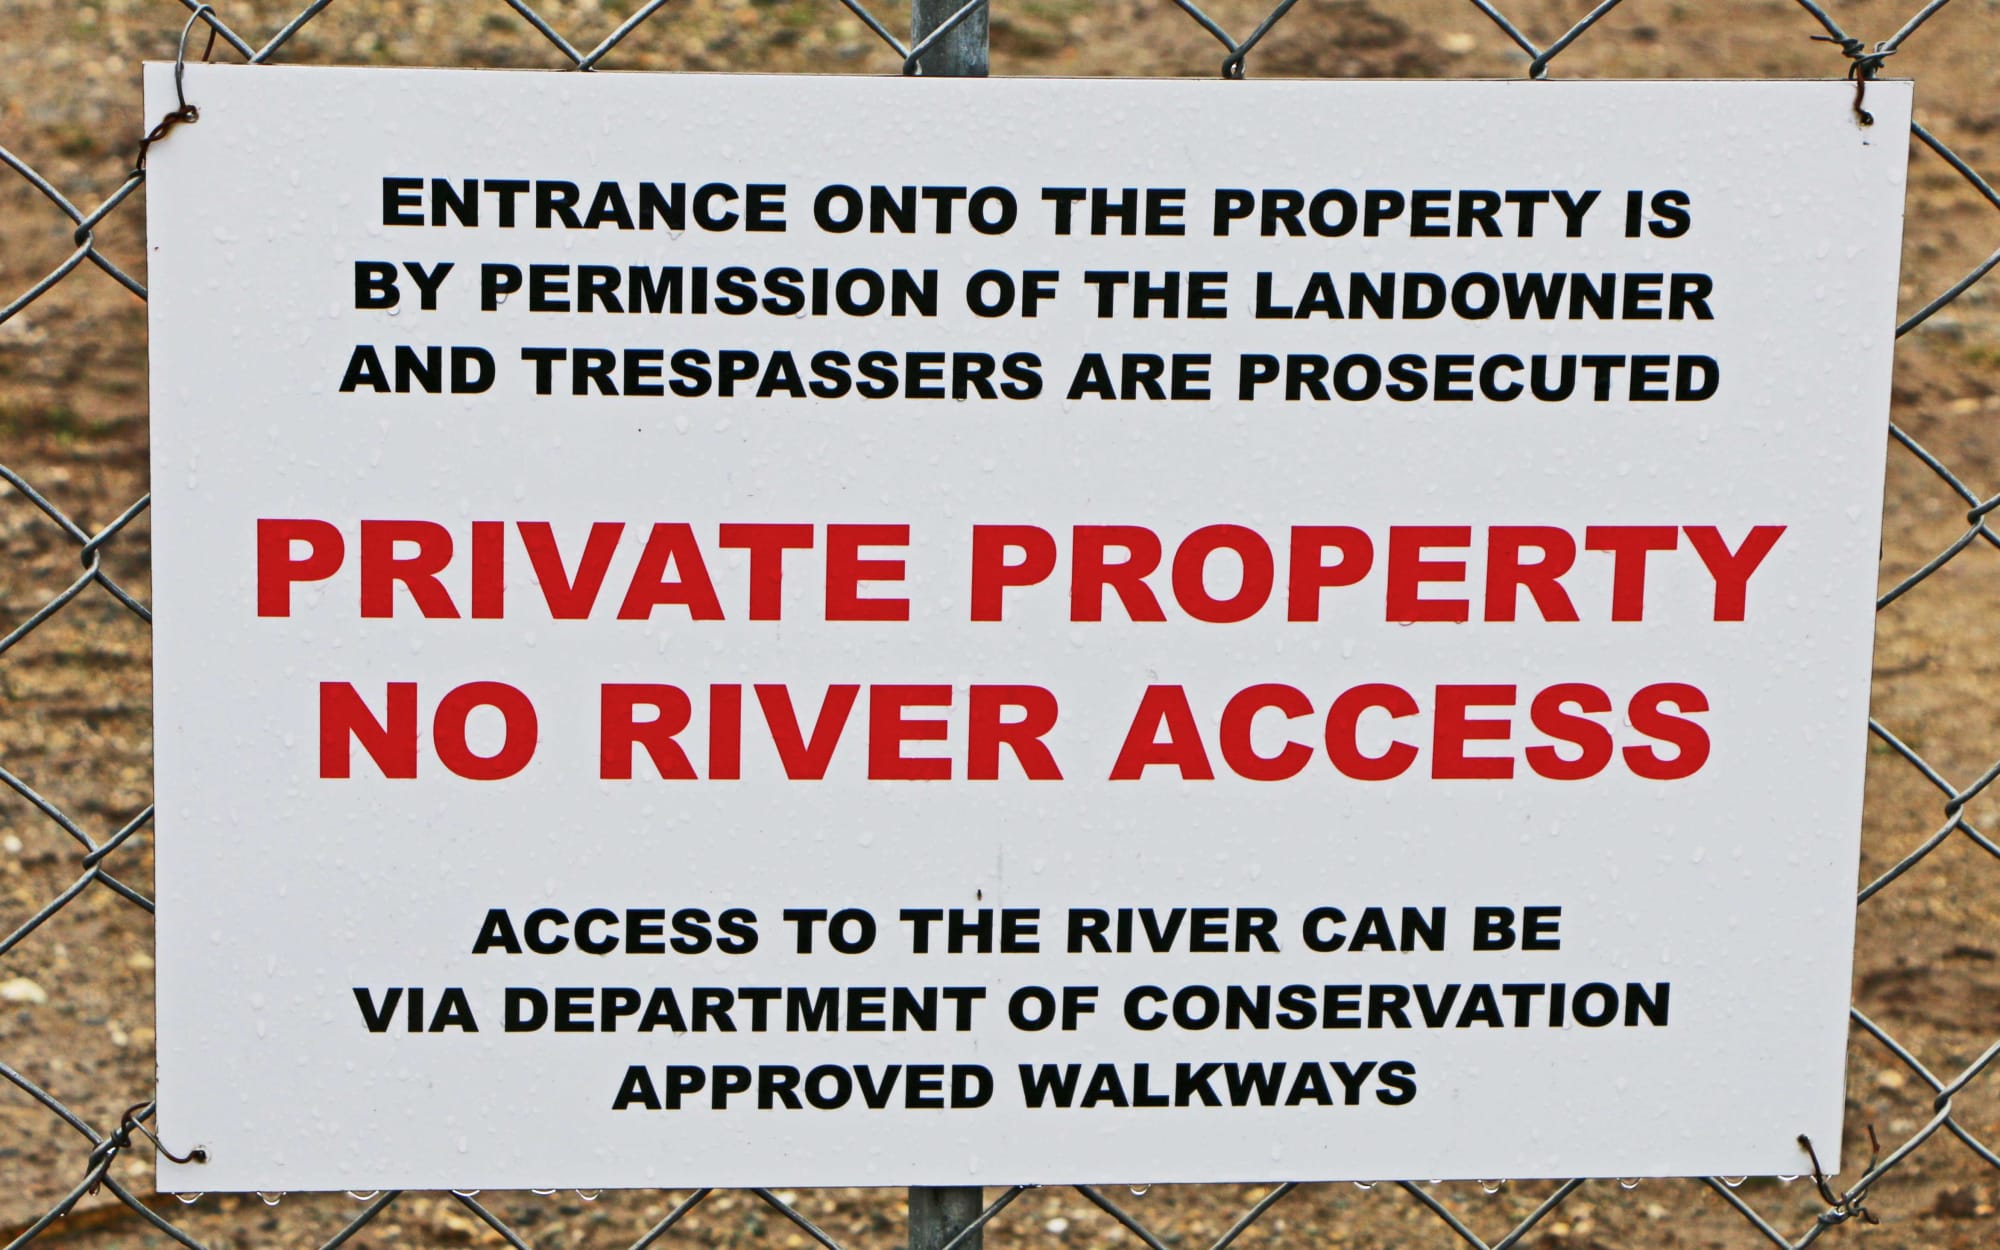 Sign saying Private Property entrance by permission, trespassers prosecuted.